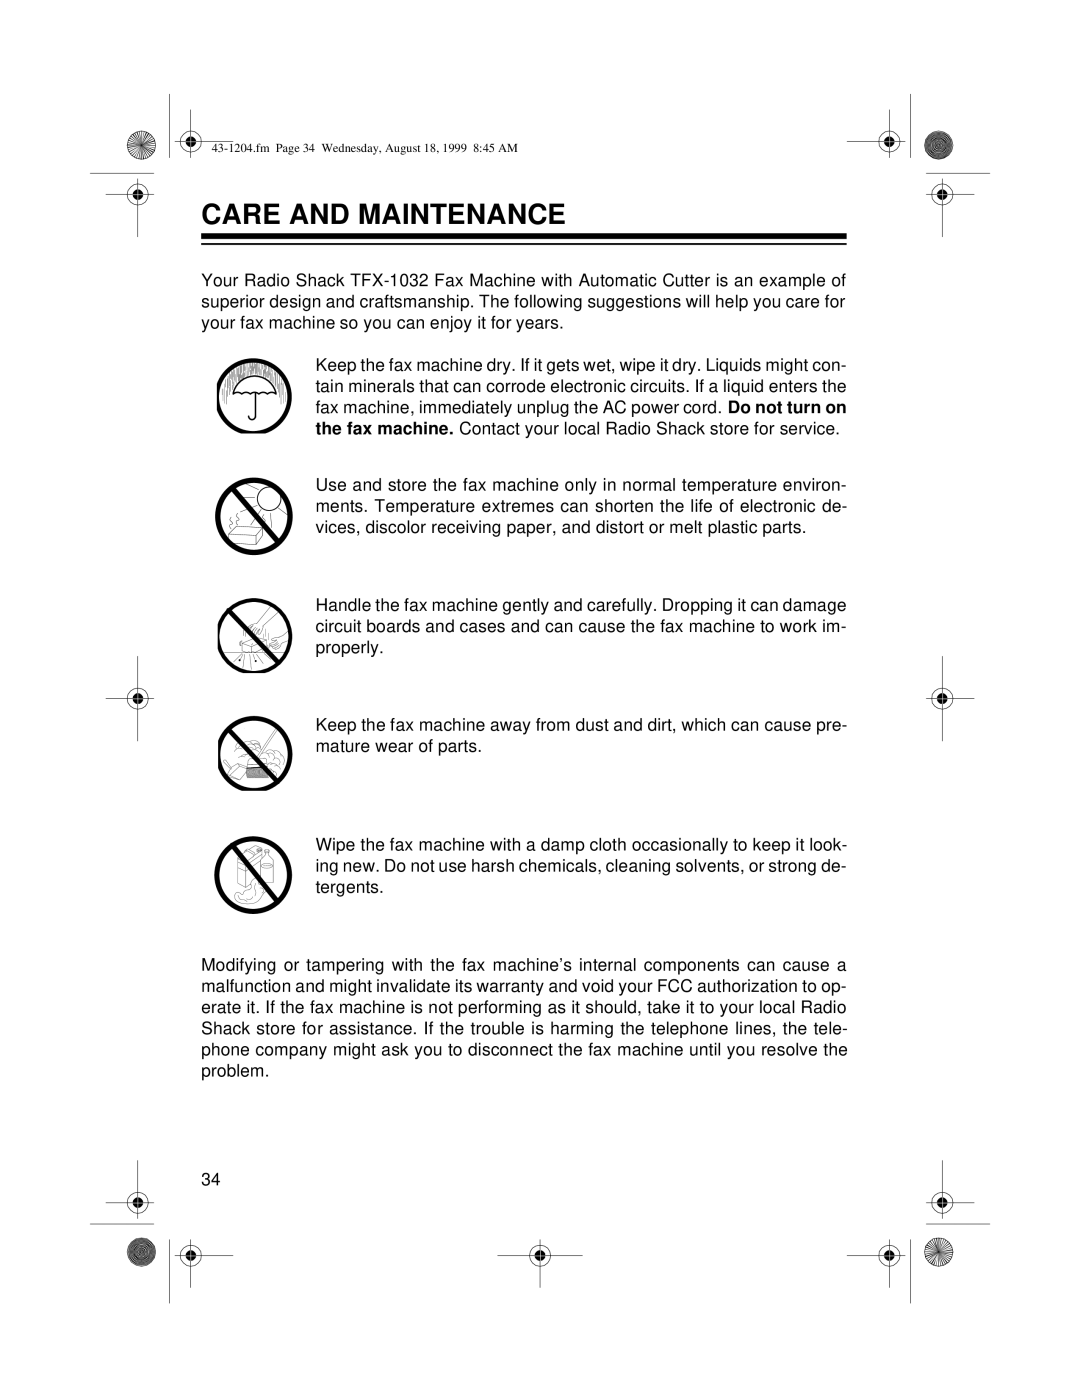 Radio Shack 43-1204 owner manual Care And Maintenance, fm Page 34 Wednesday, August 18, 1999 845 AM 